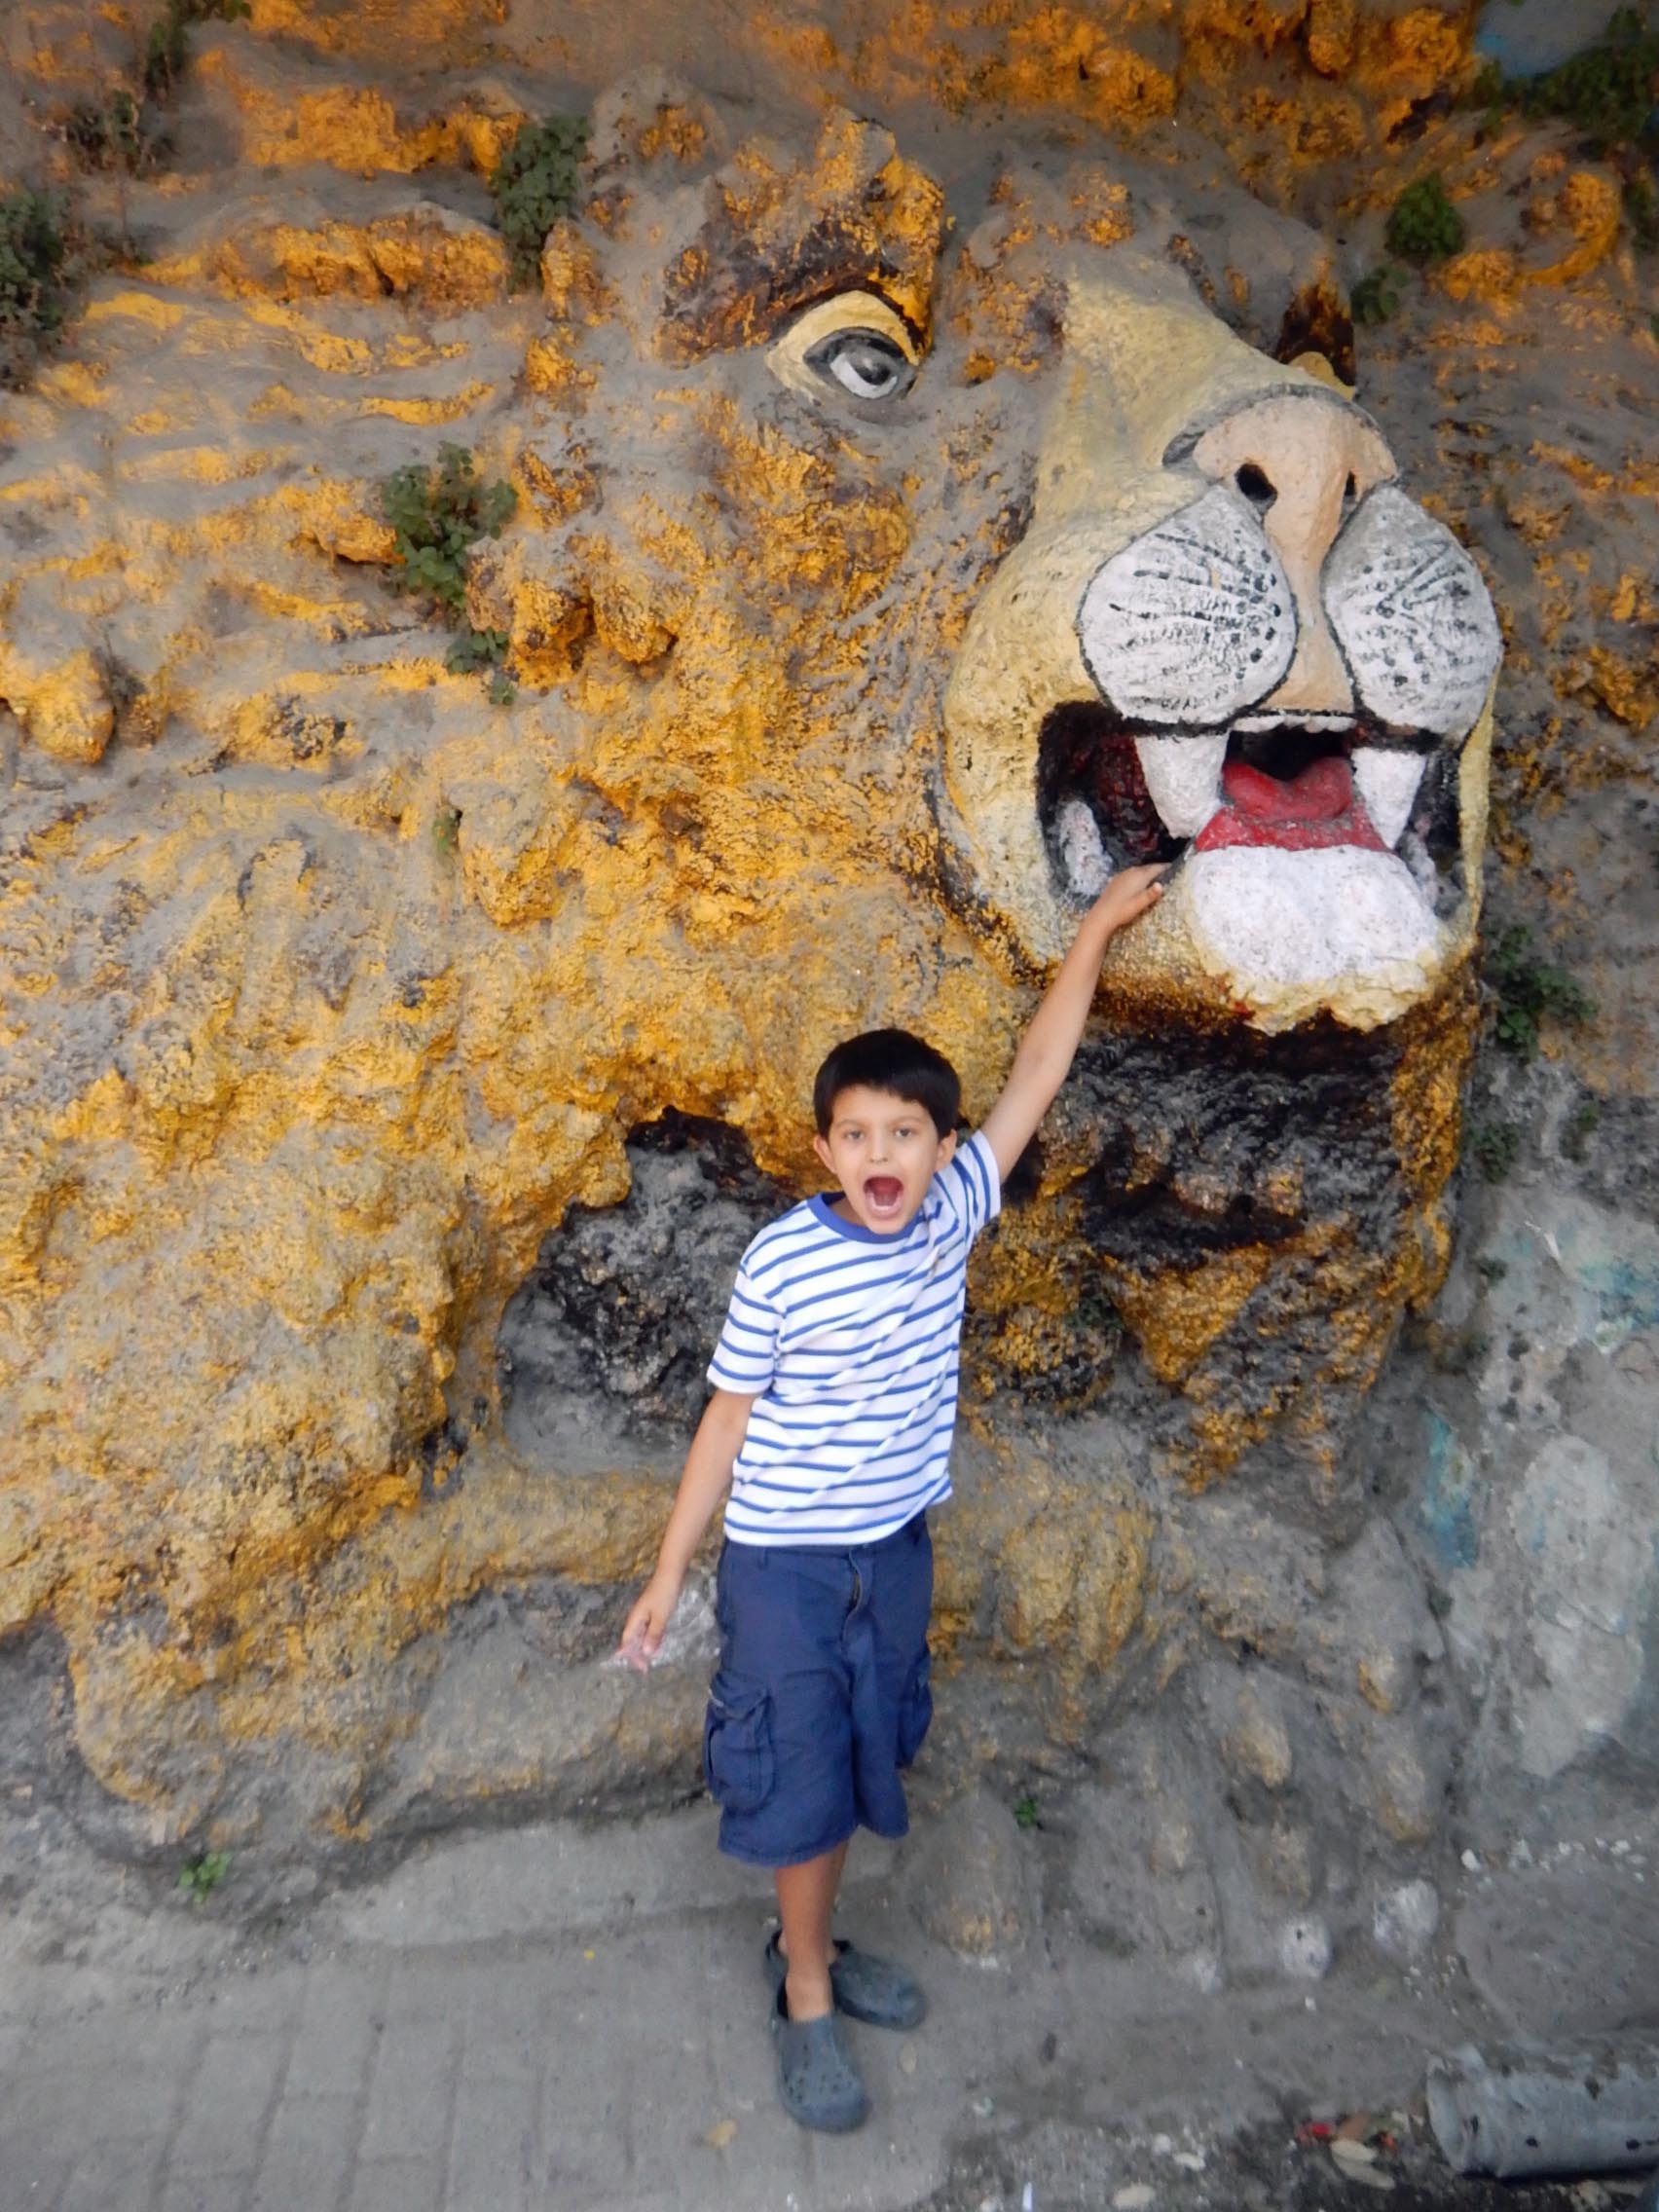 Go to Mussouri and try to put your finger in the lions nose